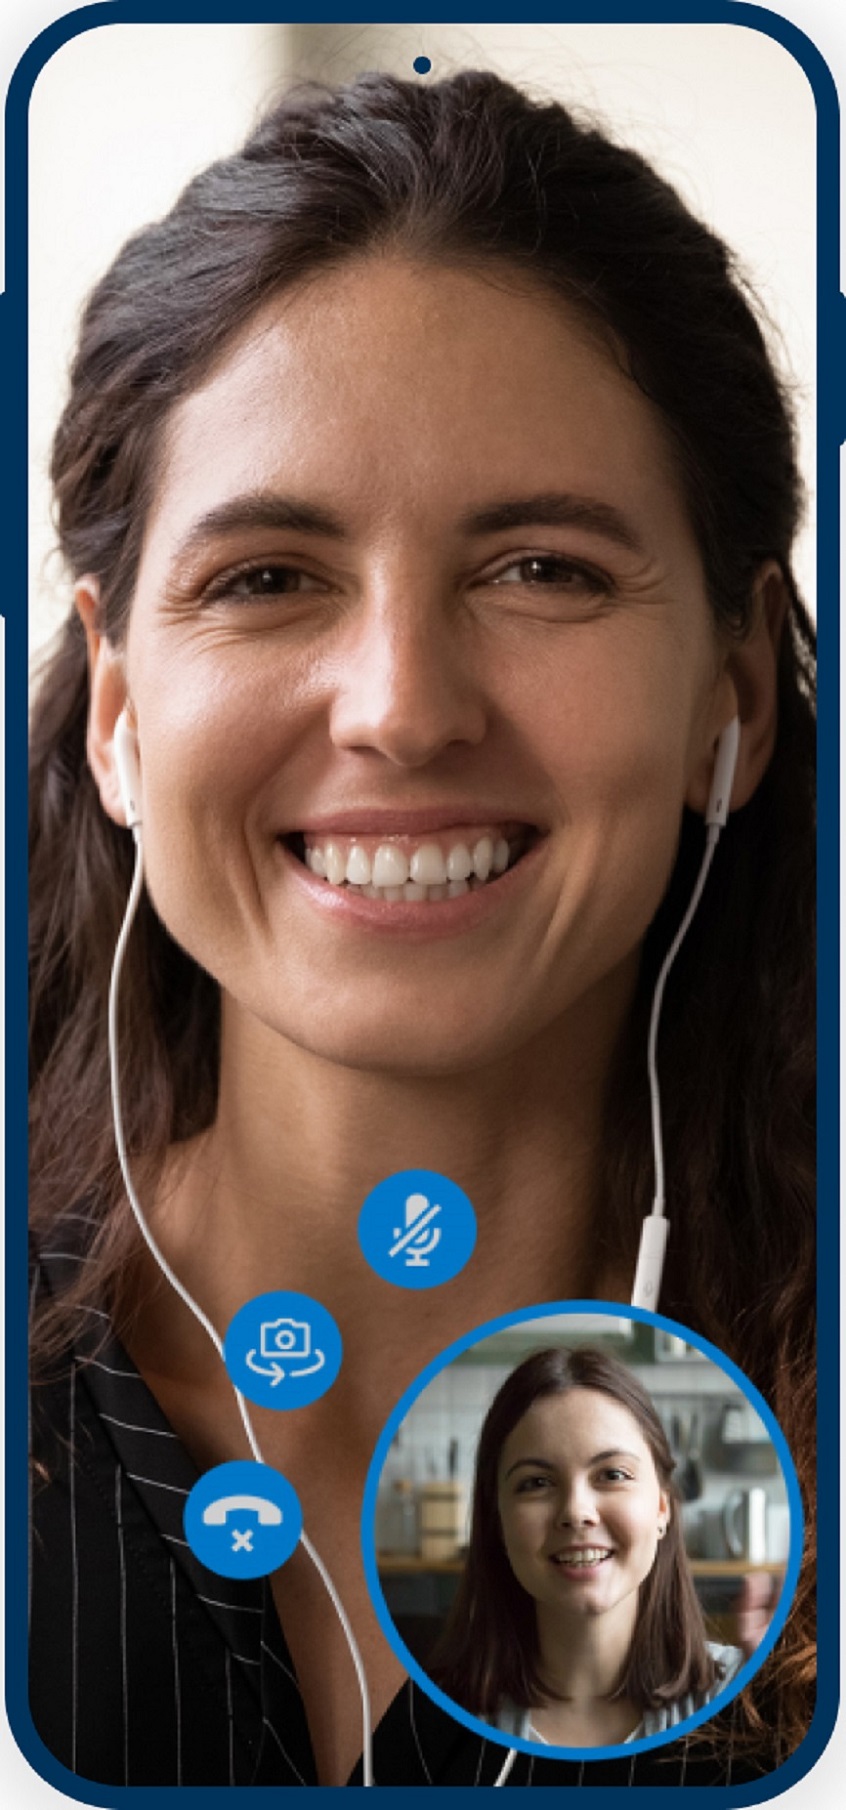 Speak to a doctor anywhere, 24/7 with Global Virtual Care; images shows video chat between two women